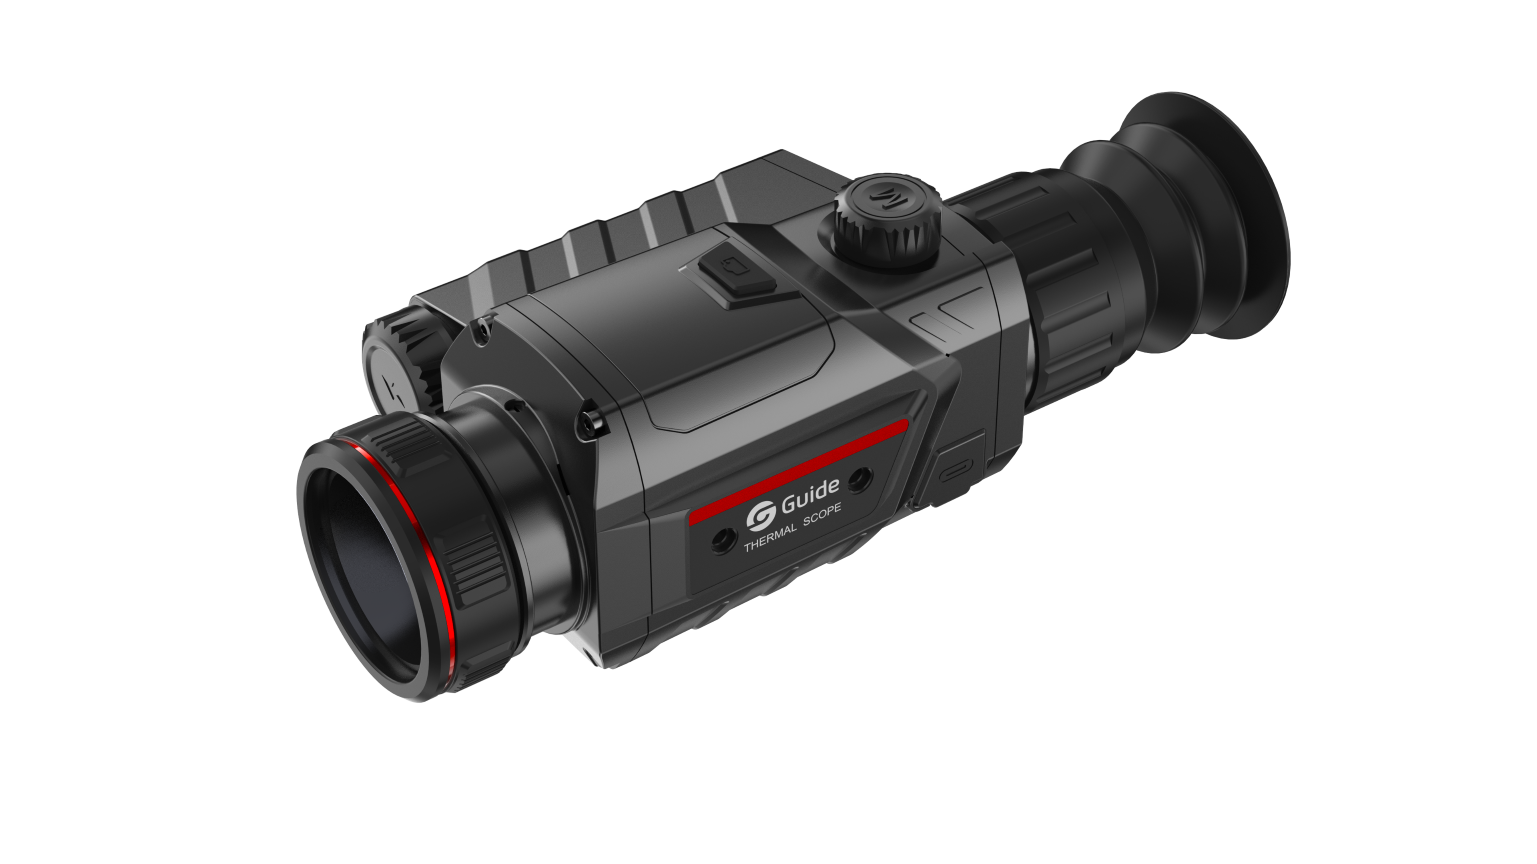 Guide Sensmart TR 420 - Thermal Riflescopes - Guide Thermal USA